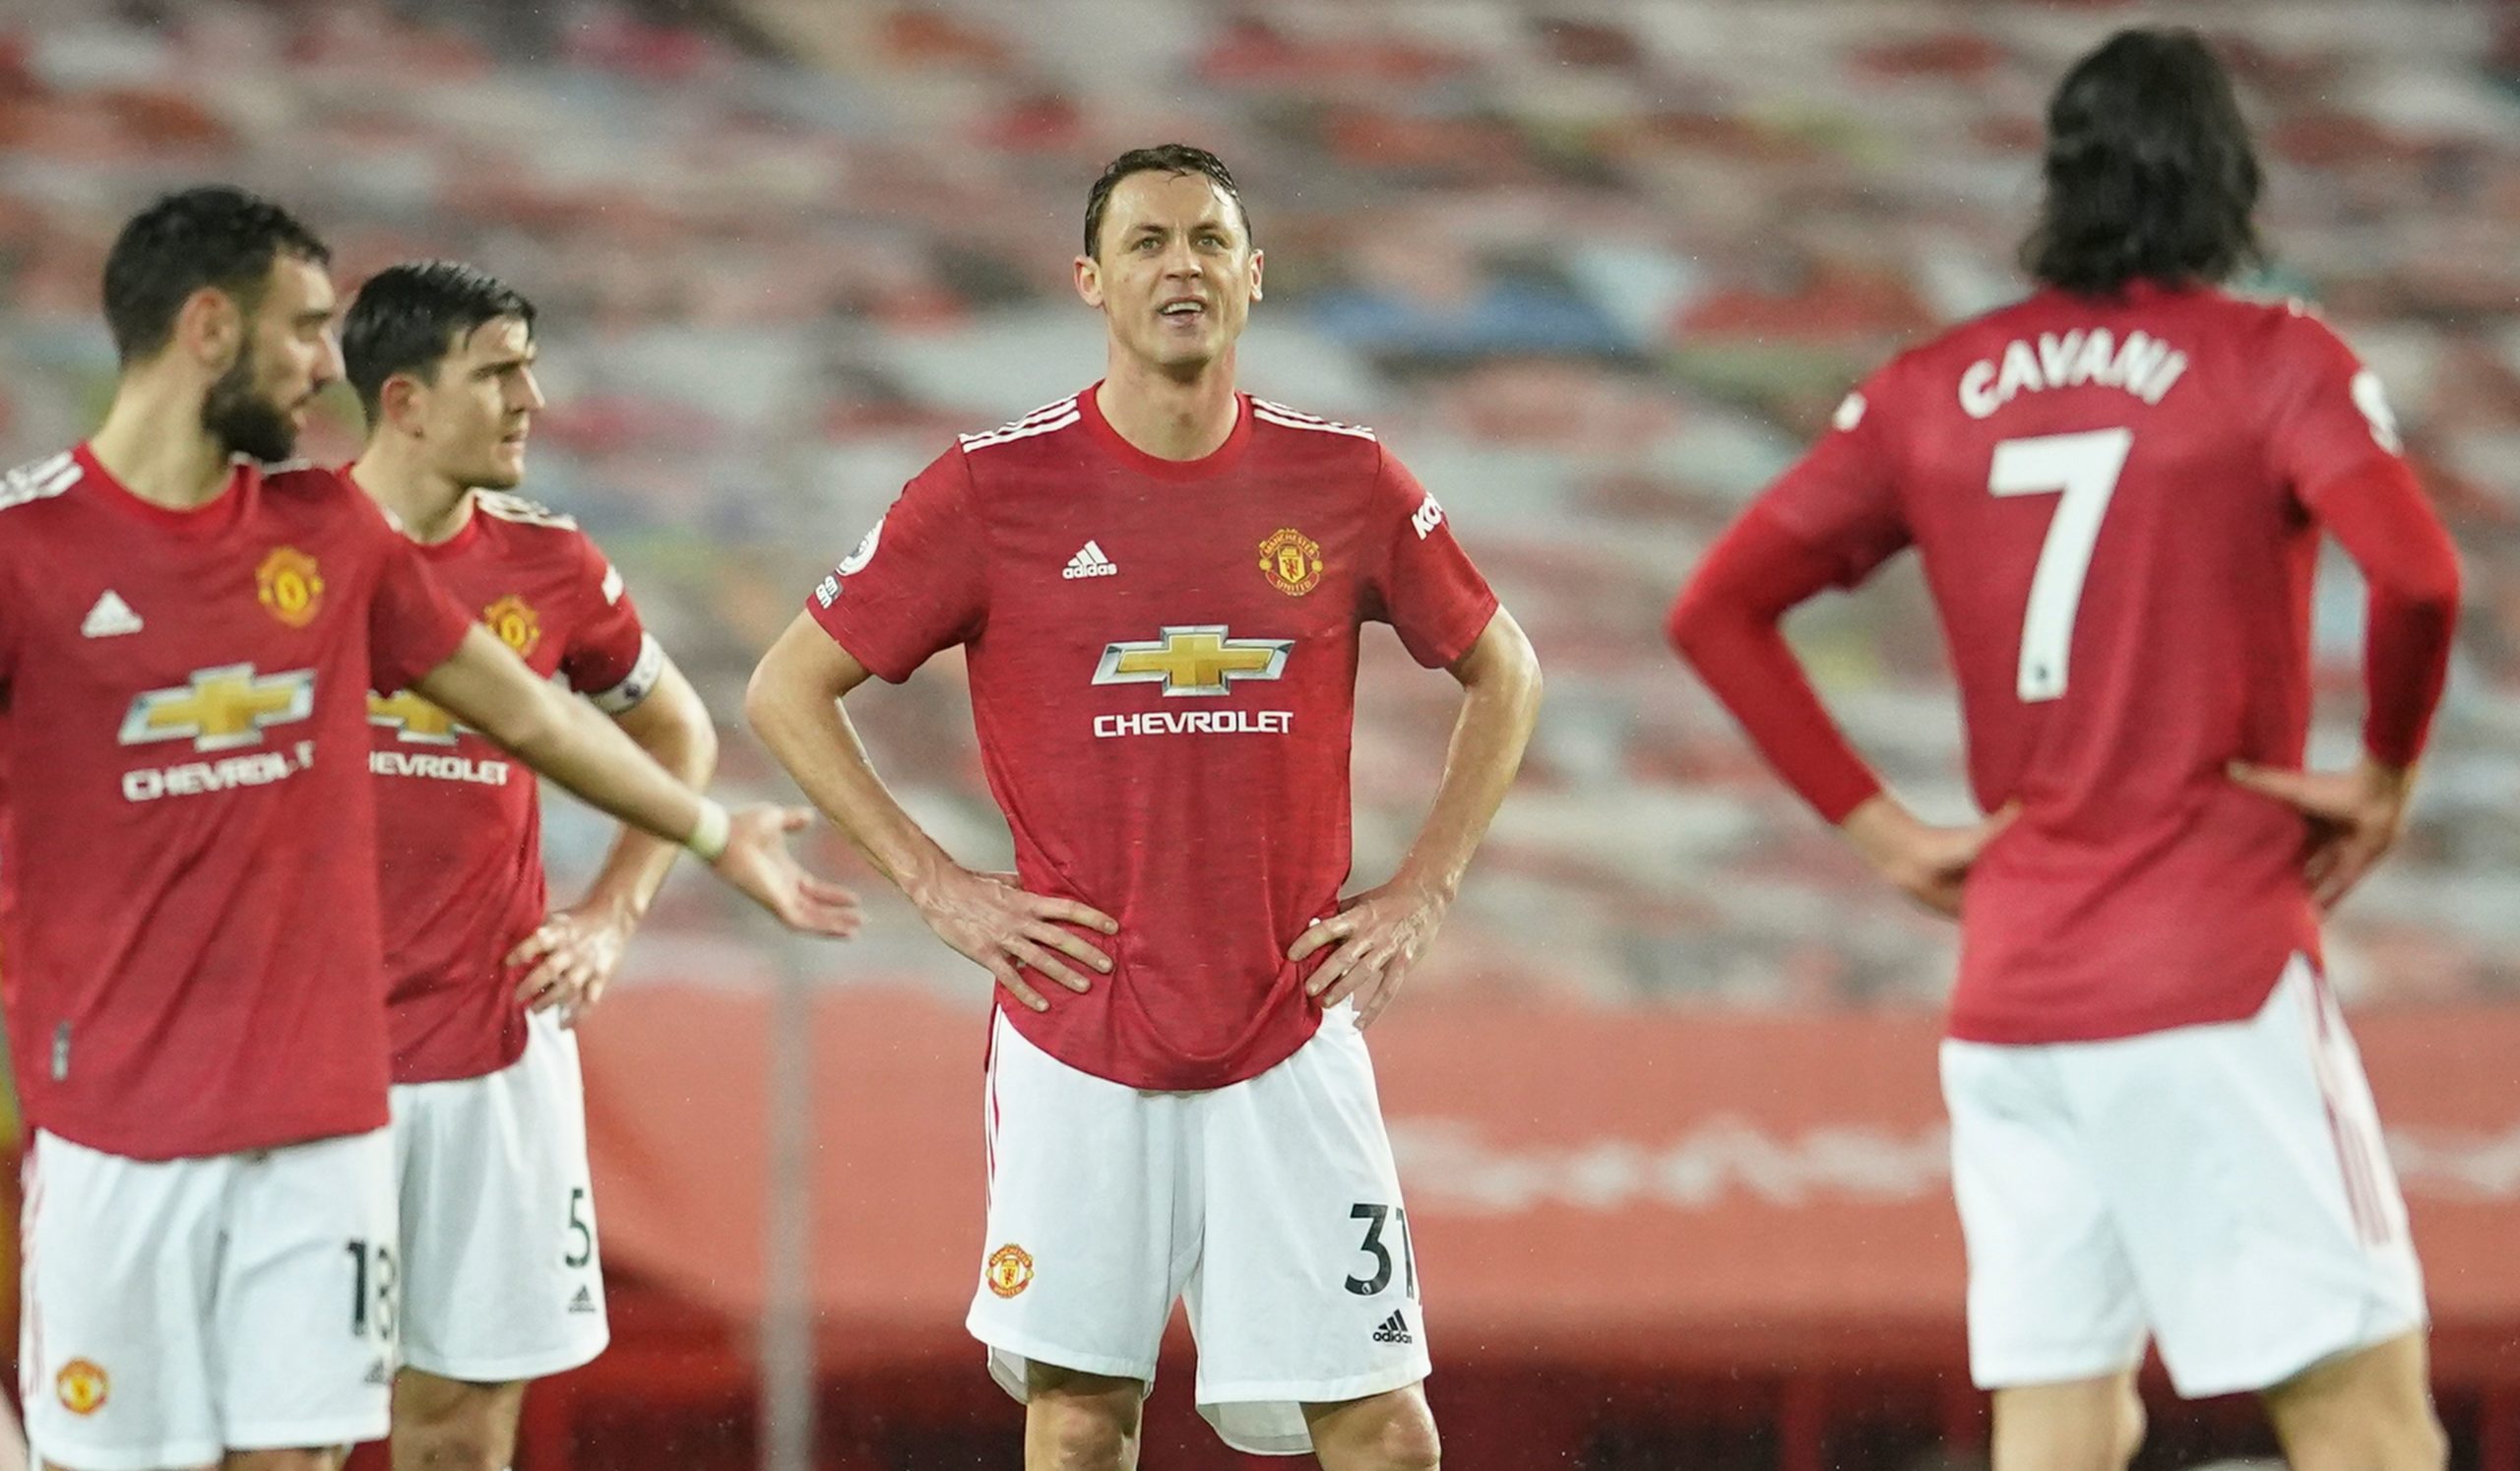 Manchester United's Matic is on AS Roma's radar (Manchester United Players can be seen in the picture)